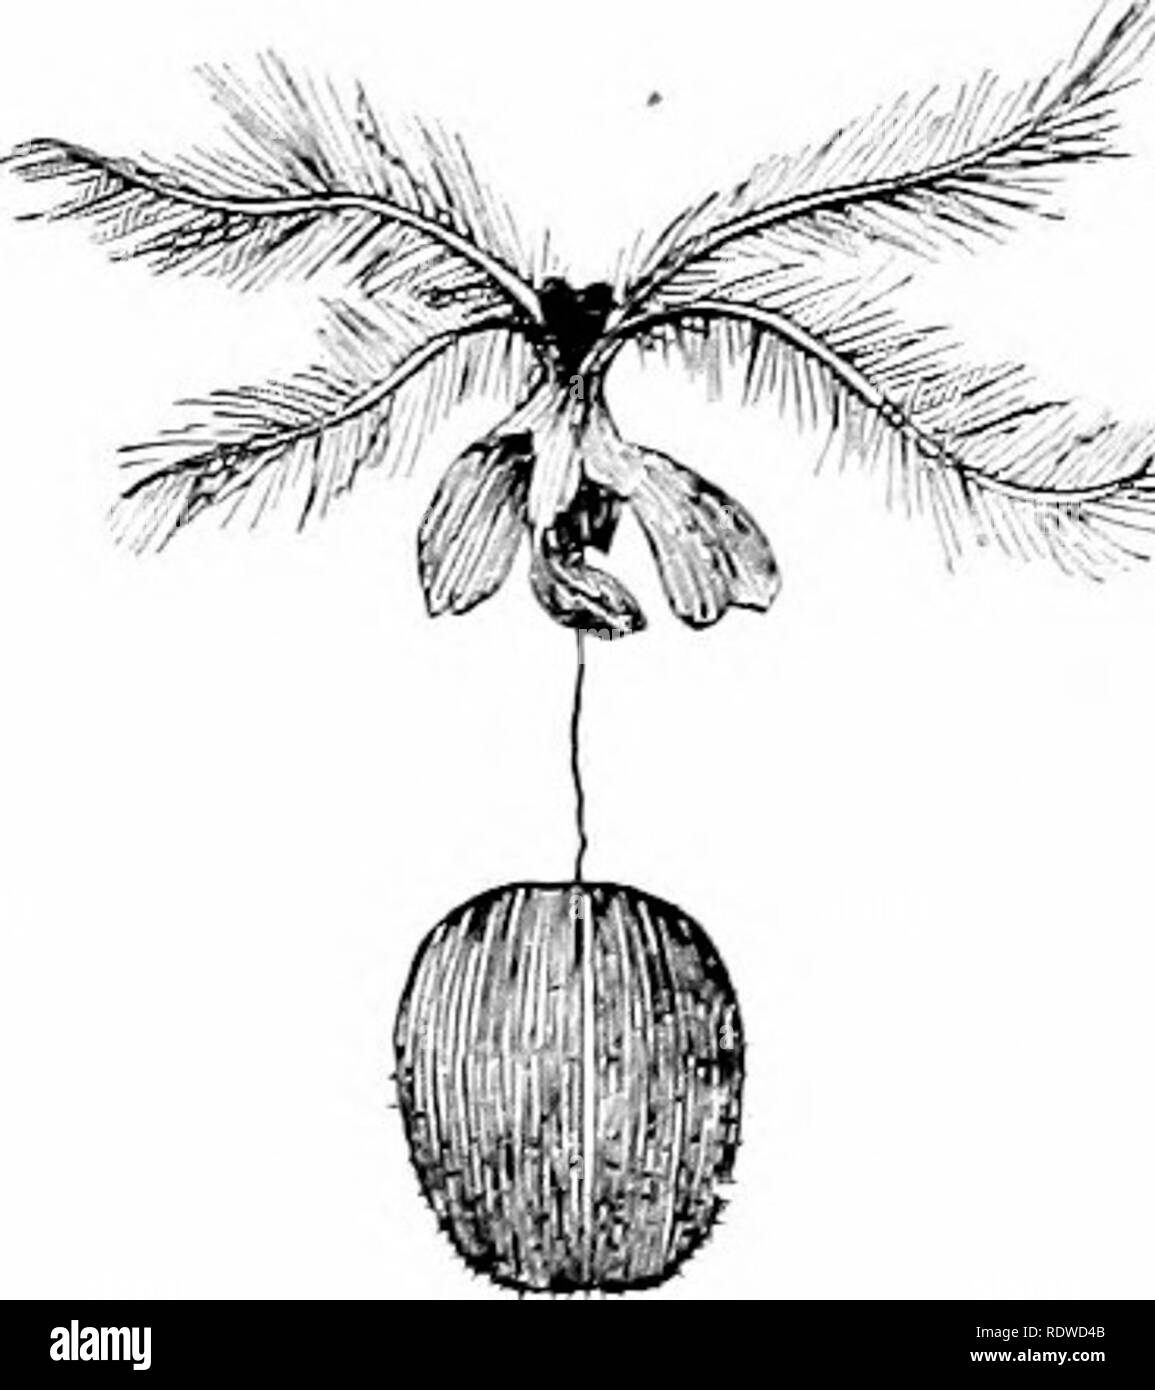 . Plants and their ways in South Africa. Botany; Botany. '&gt;-^. Fig. 183.—Ripe seed of Epilobinm^ FiG. 184.—Leuaidendron argen- with coronet of hairs (magnified). teum^ R. Br. Nut witil persist- (Froni Tlloin^ and Bennett's ent style and calyx, the latter &quot; Structural and Physiological split at its base and prevented Botany &quot;.) fromslipping ofTby the knobby stigraa. (From Edmonds and Marloth's &quot; Elementary Bo- tany for South Africa&quot;.) plant and remain there they would have a hard struggle for existence in soil already exhausted. The flowers of Albuca hang downward and pro Stock Photo